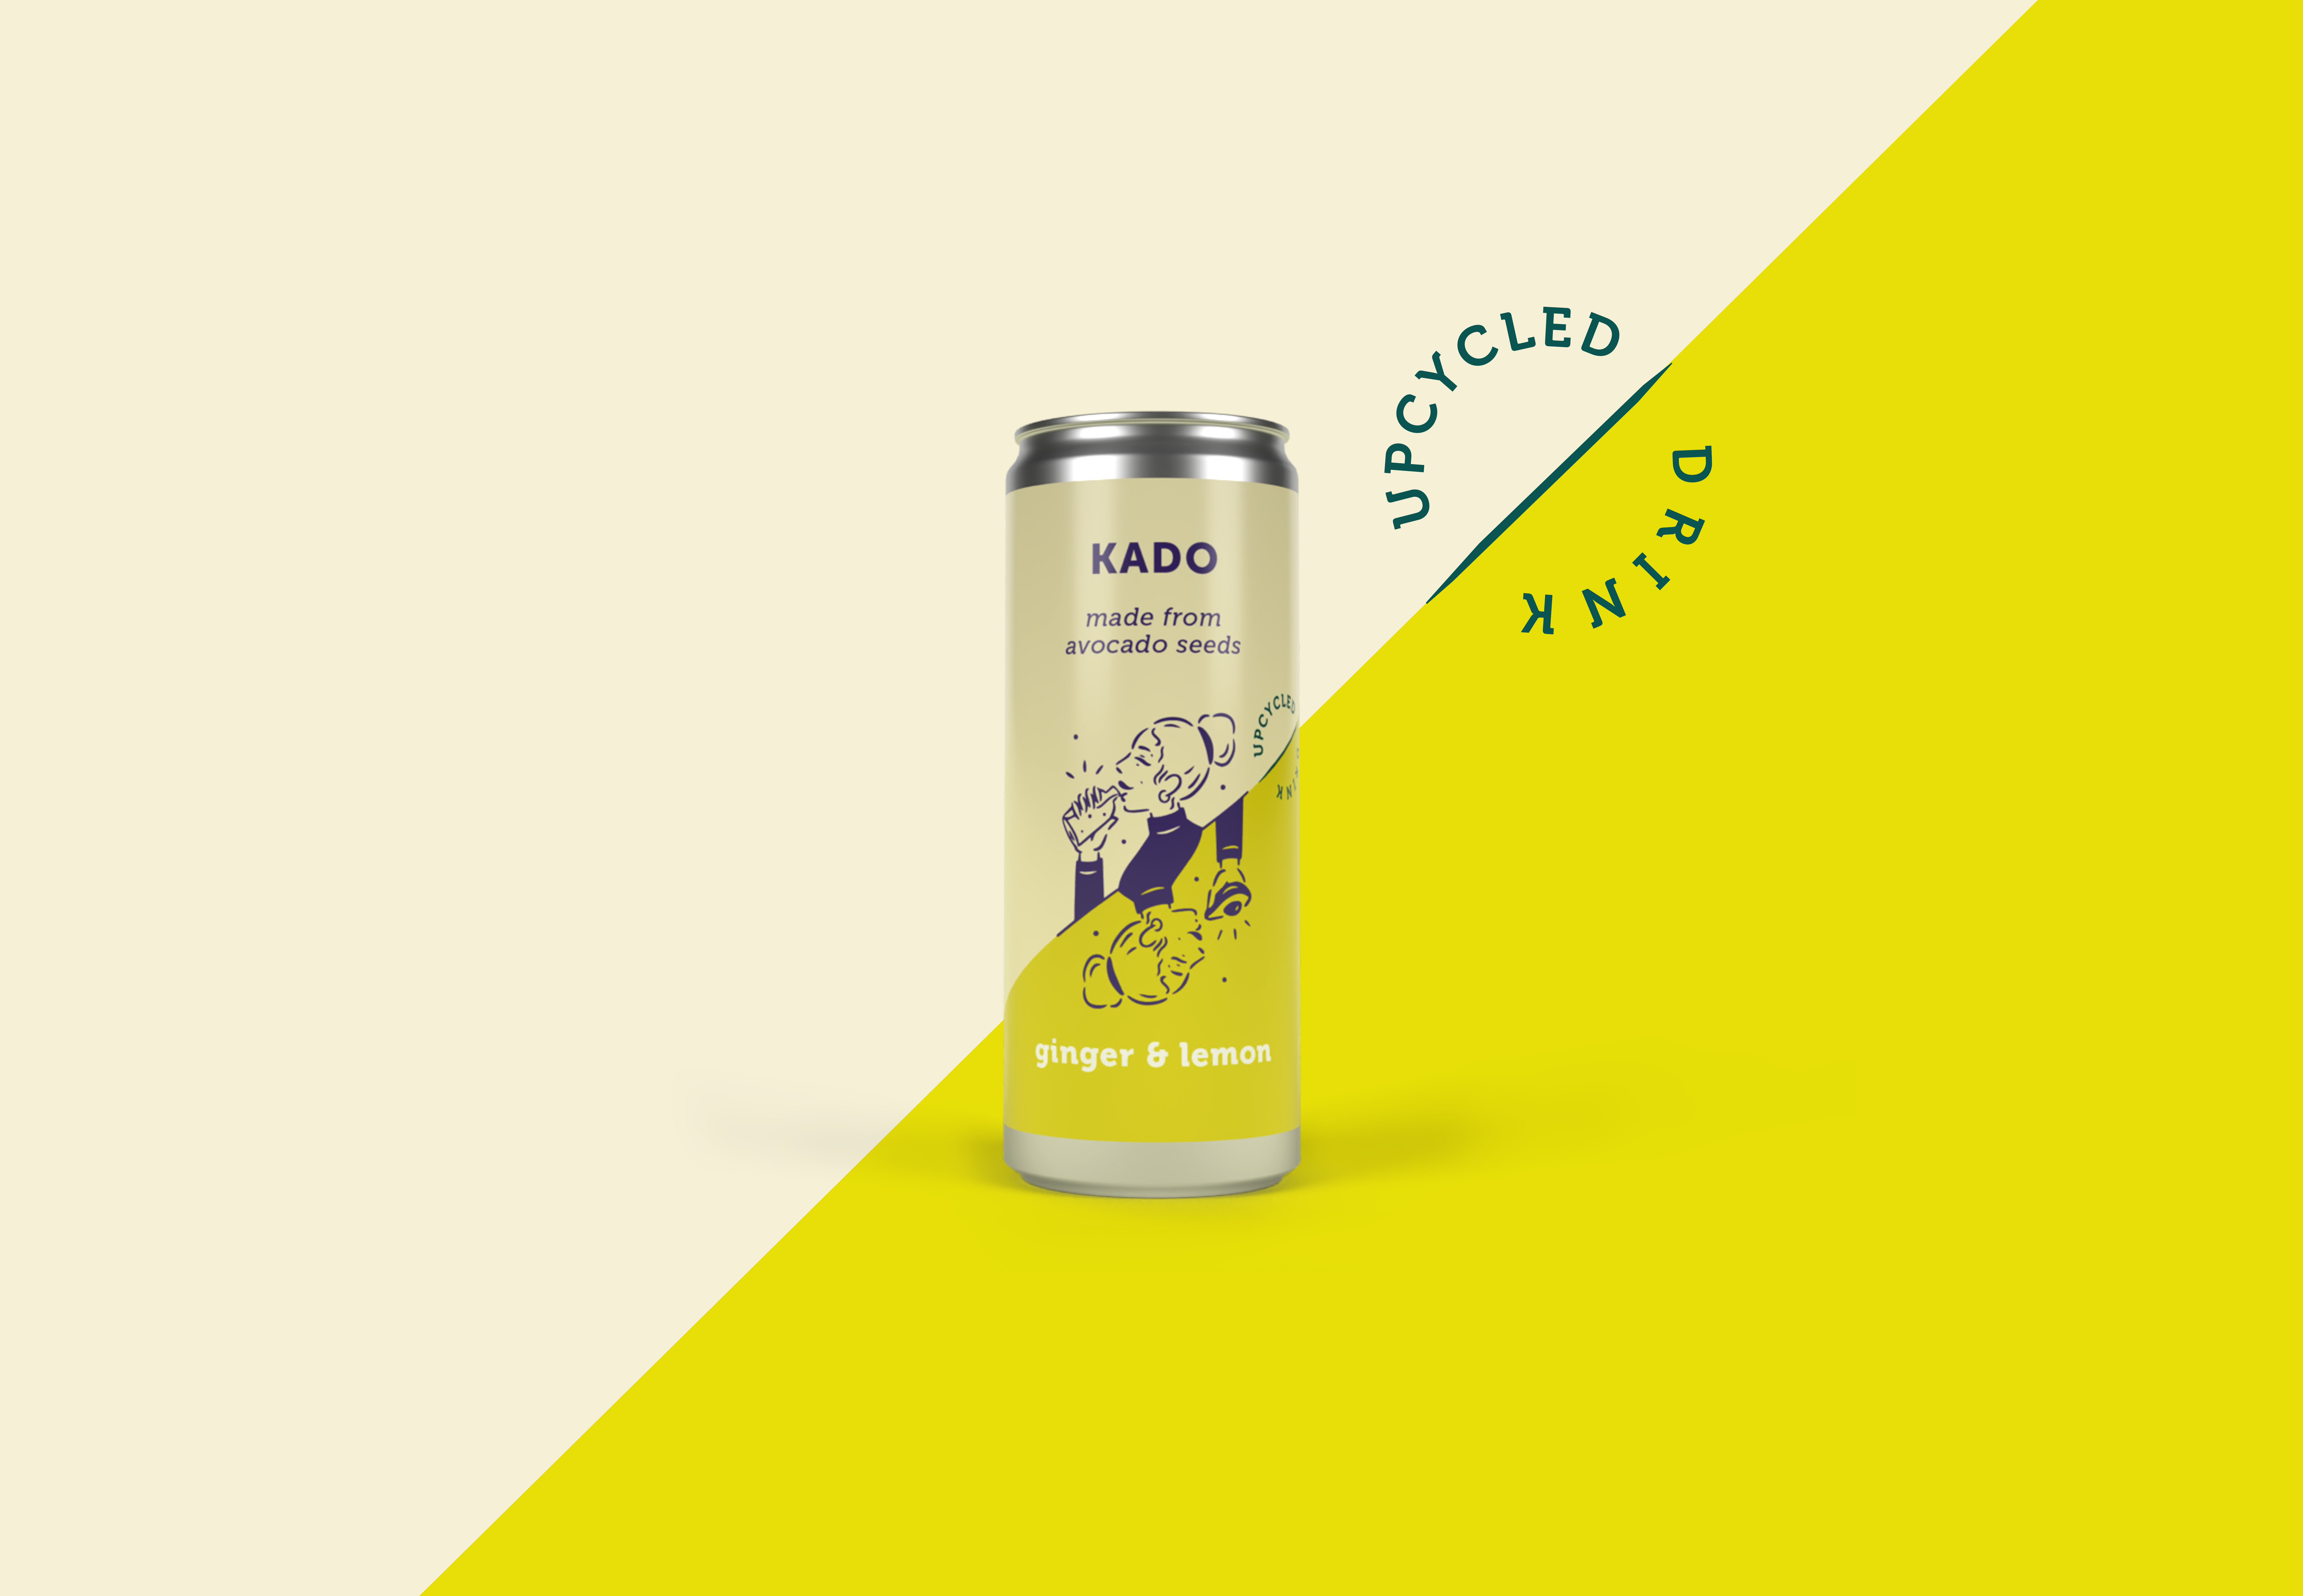 KADO the drink made from upcycled avocado seeds